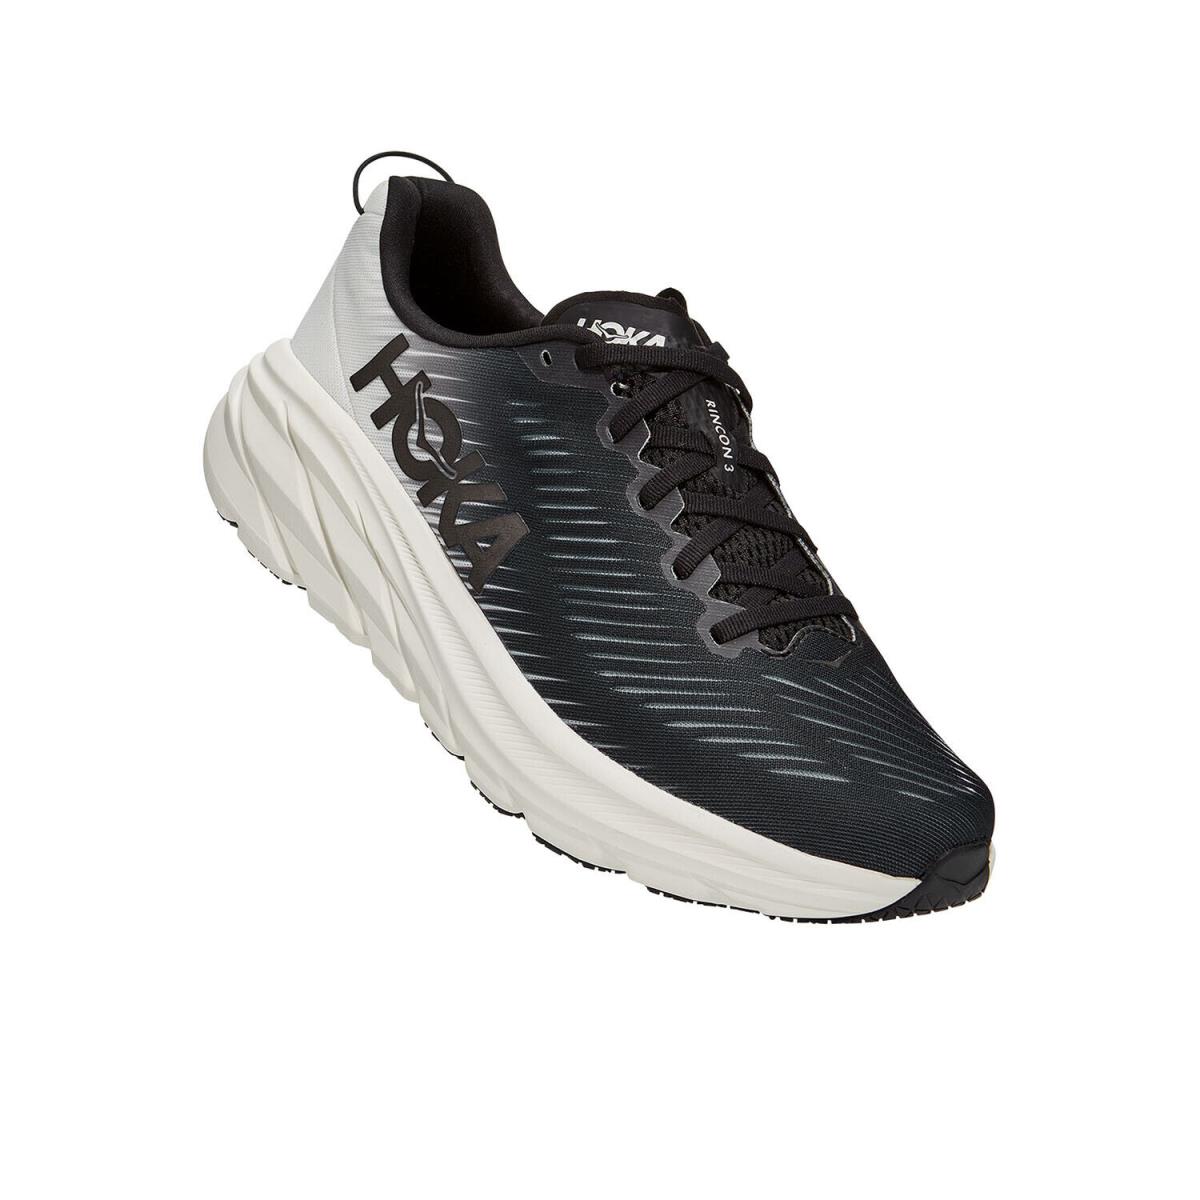 Hoka One One Rincon 3 1119395-BWHT Sneakers Men`s Black White Running Shoes D258